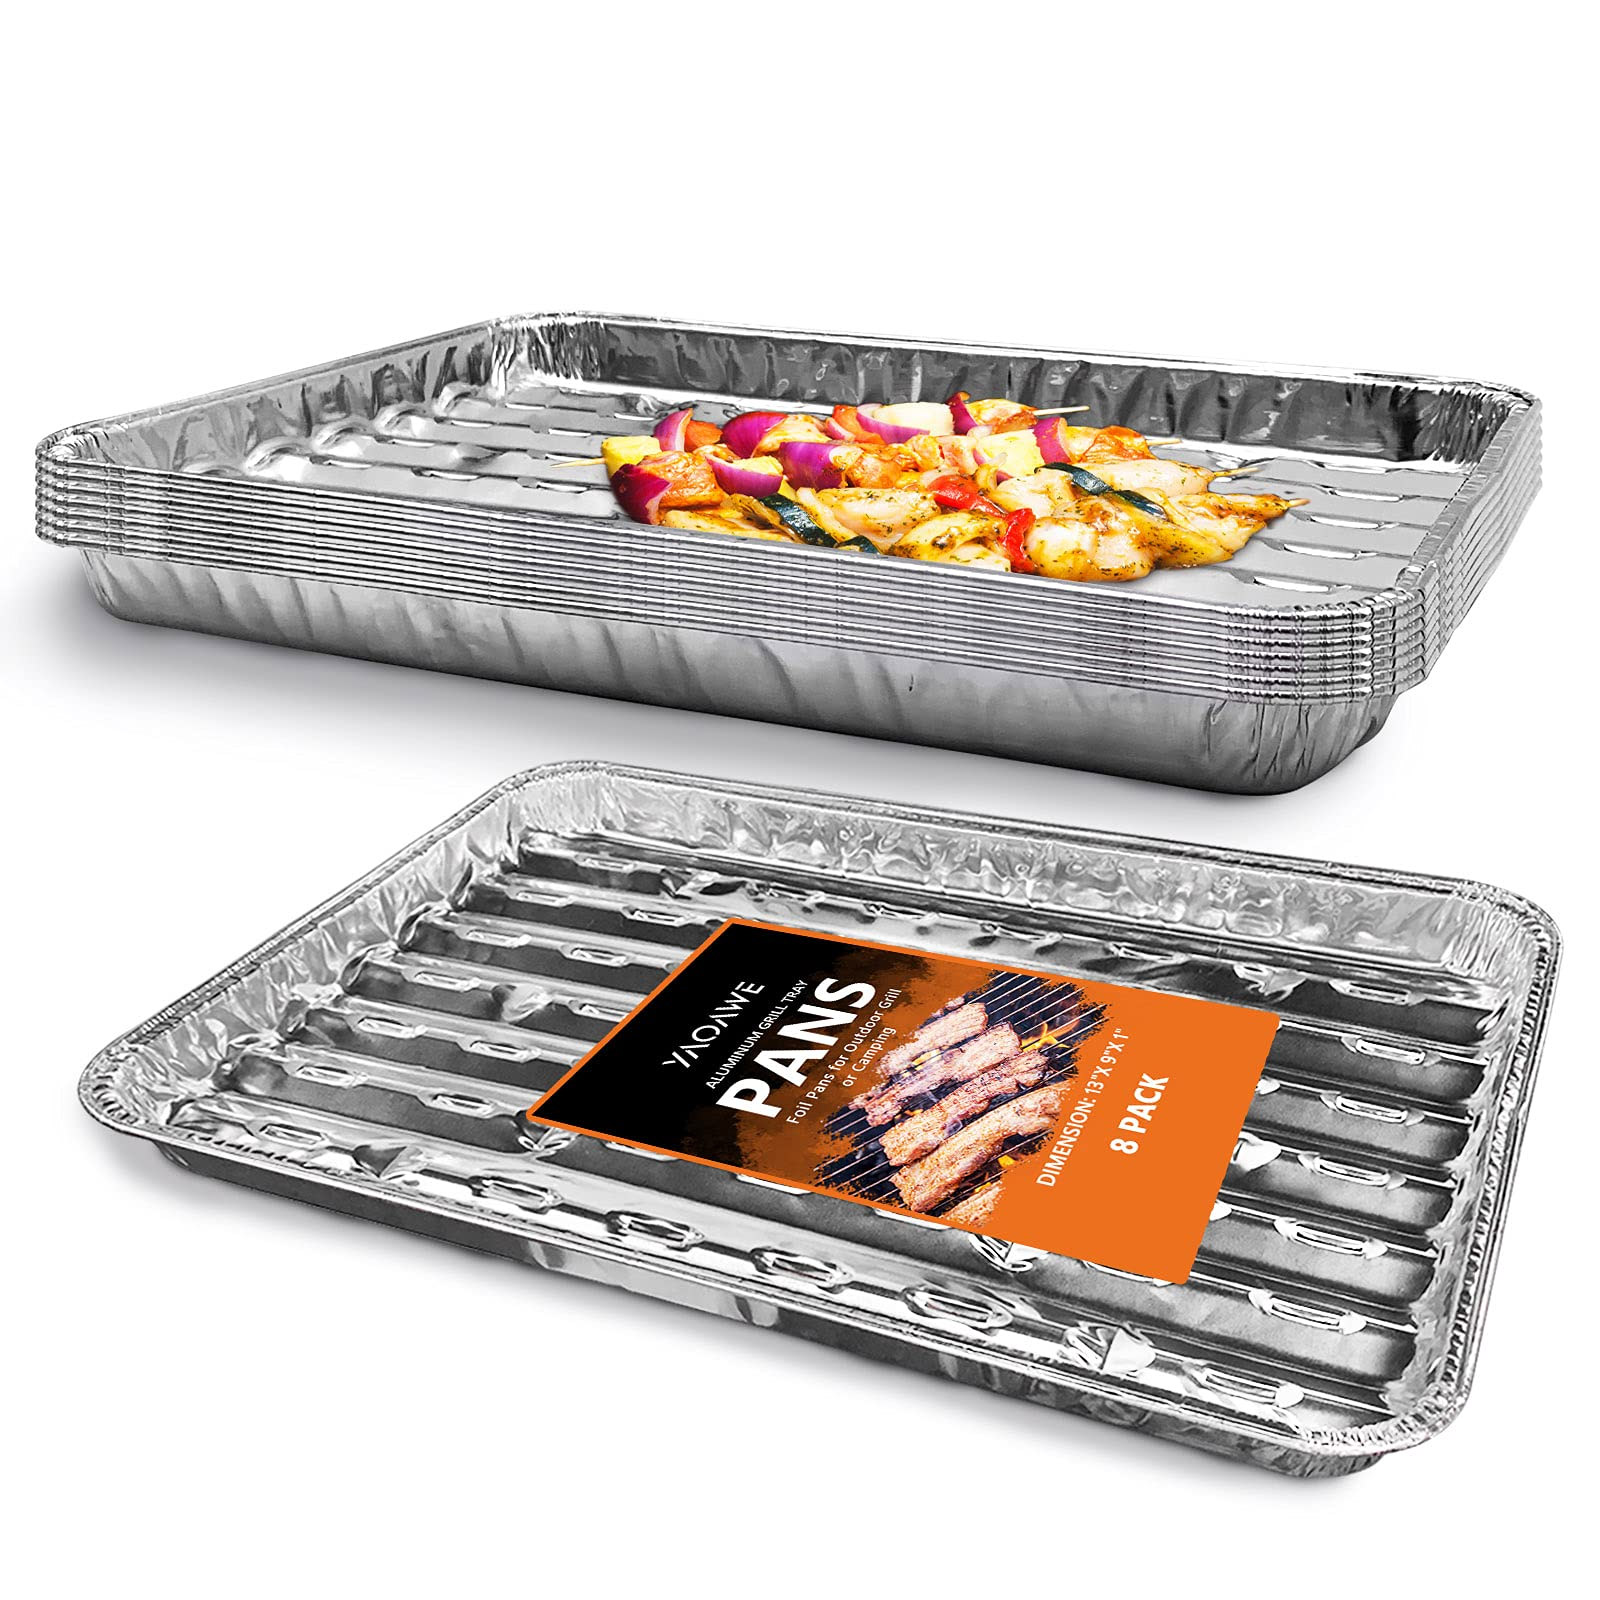 Aluminum Broiler Pans fit Cooking/Grilling/Heating, 13.58"x9.05"x1.1" -YAOAWE